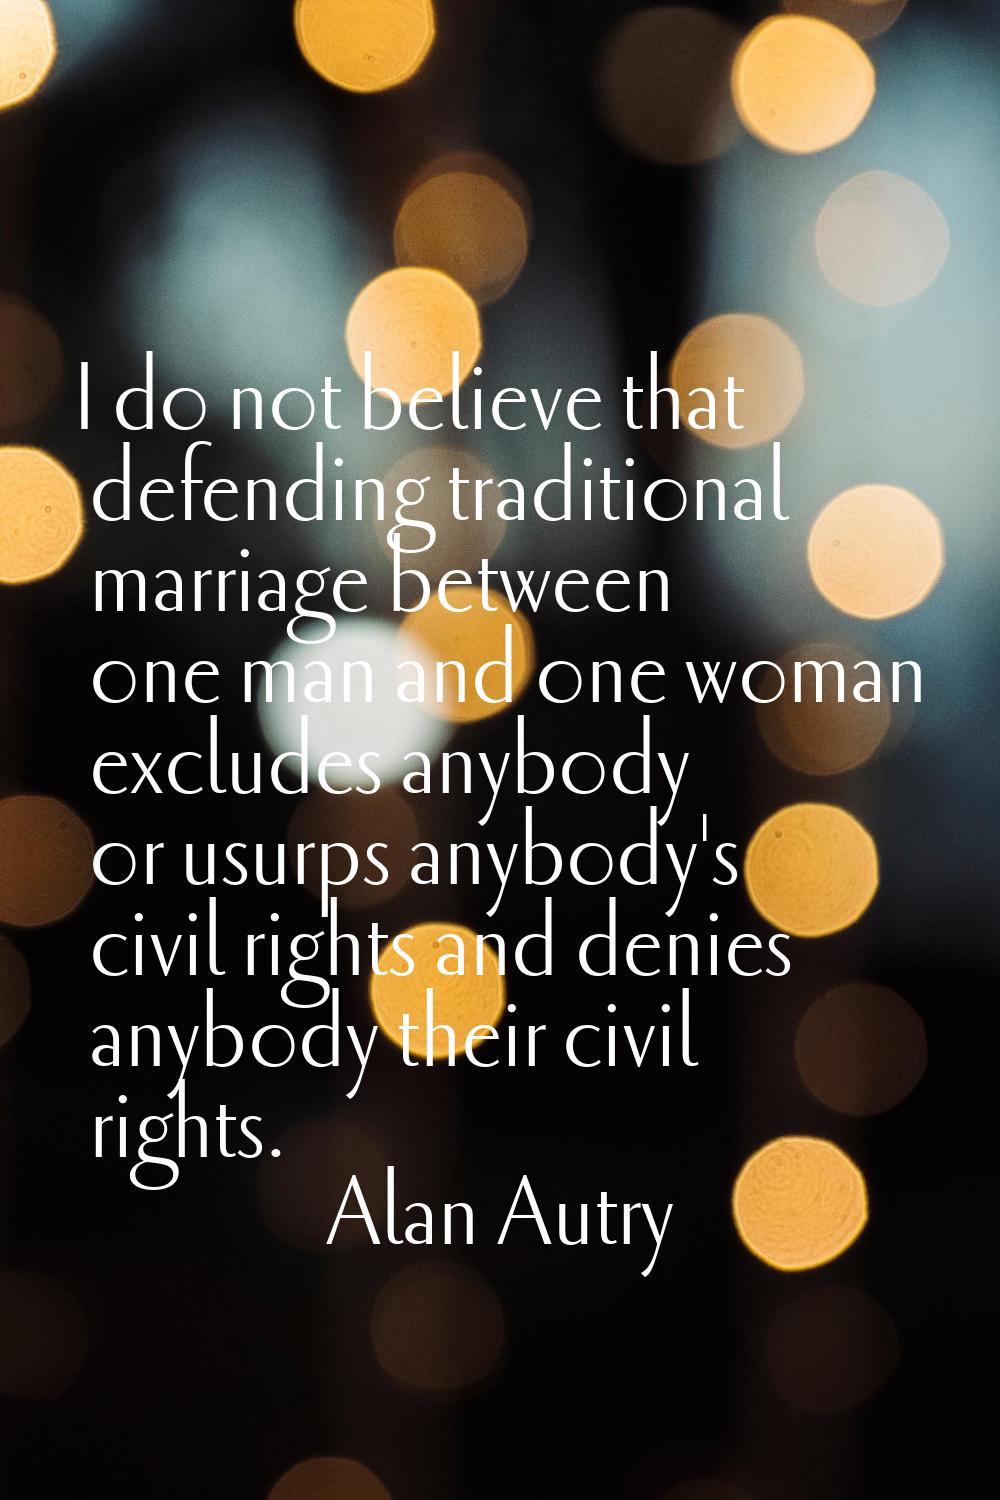 I do not believe that defending traditional marriage between one man and one woman excludes anybody